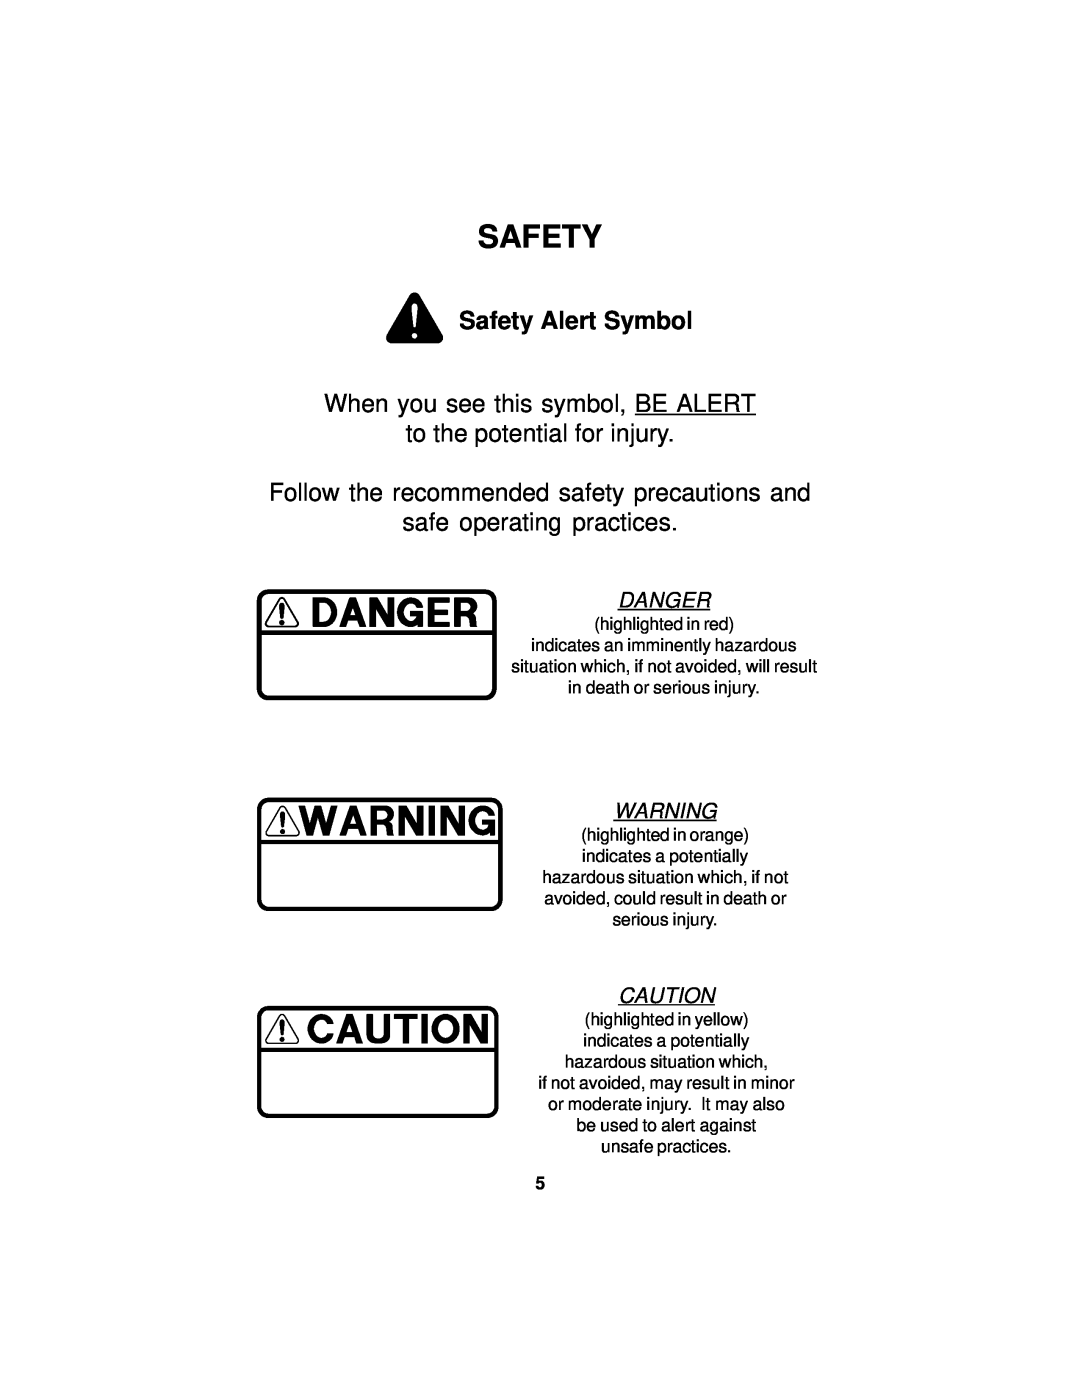 Dixon 14295-0804 manual Safety Alert Symbol, When you see this symbol, BE ALERT to the potential for injury, Danger 